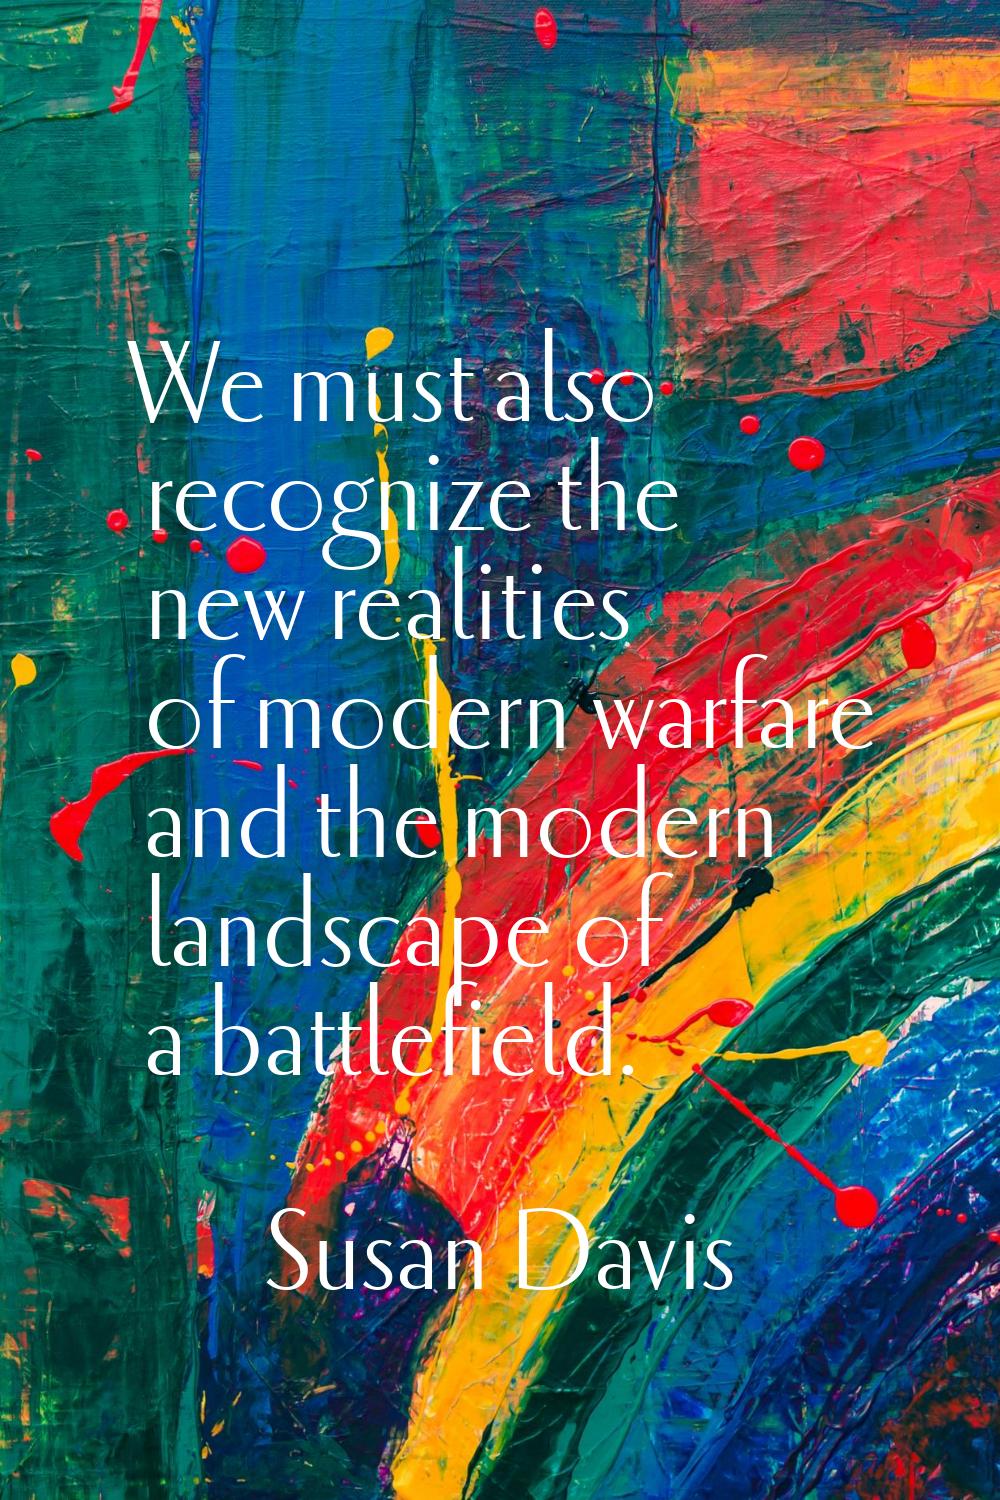 We must also recognize the new realities of modern warfare and the modern landscape of a battlefiel